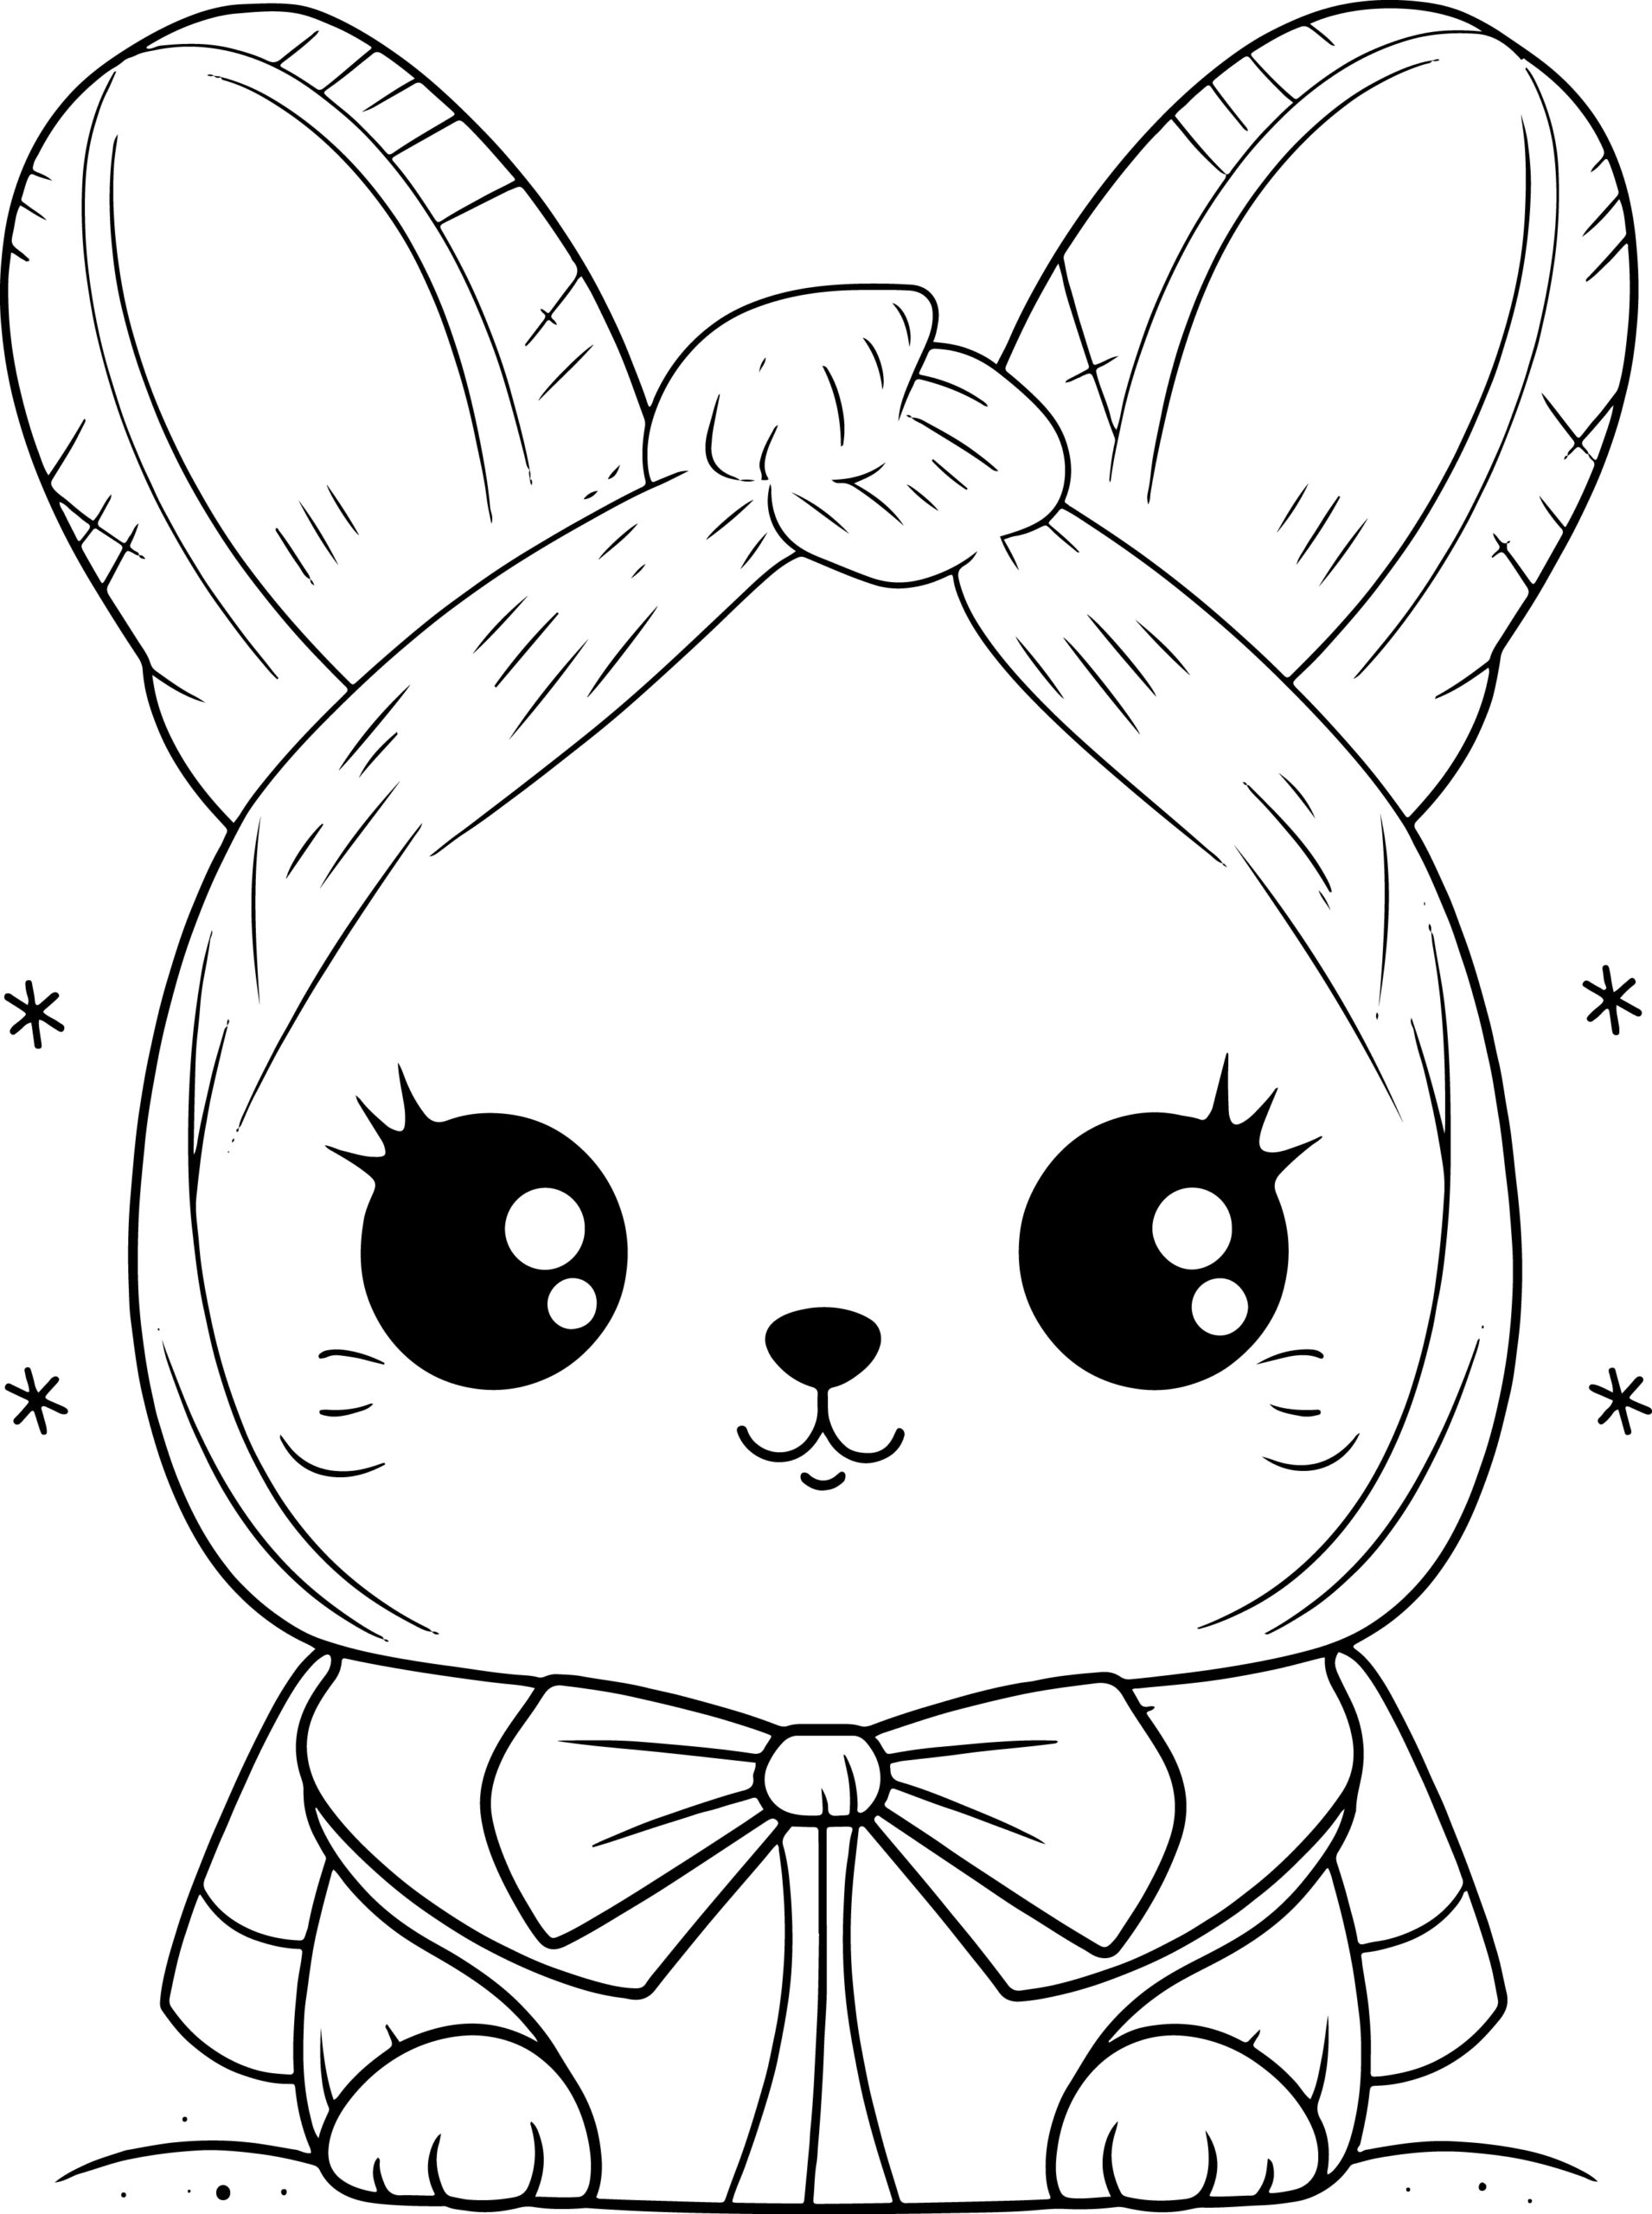 Kawaii coloring book cute and easy coloring pages with kawaii animals made by teachers